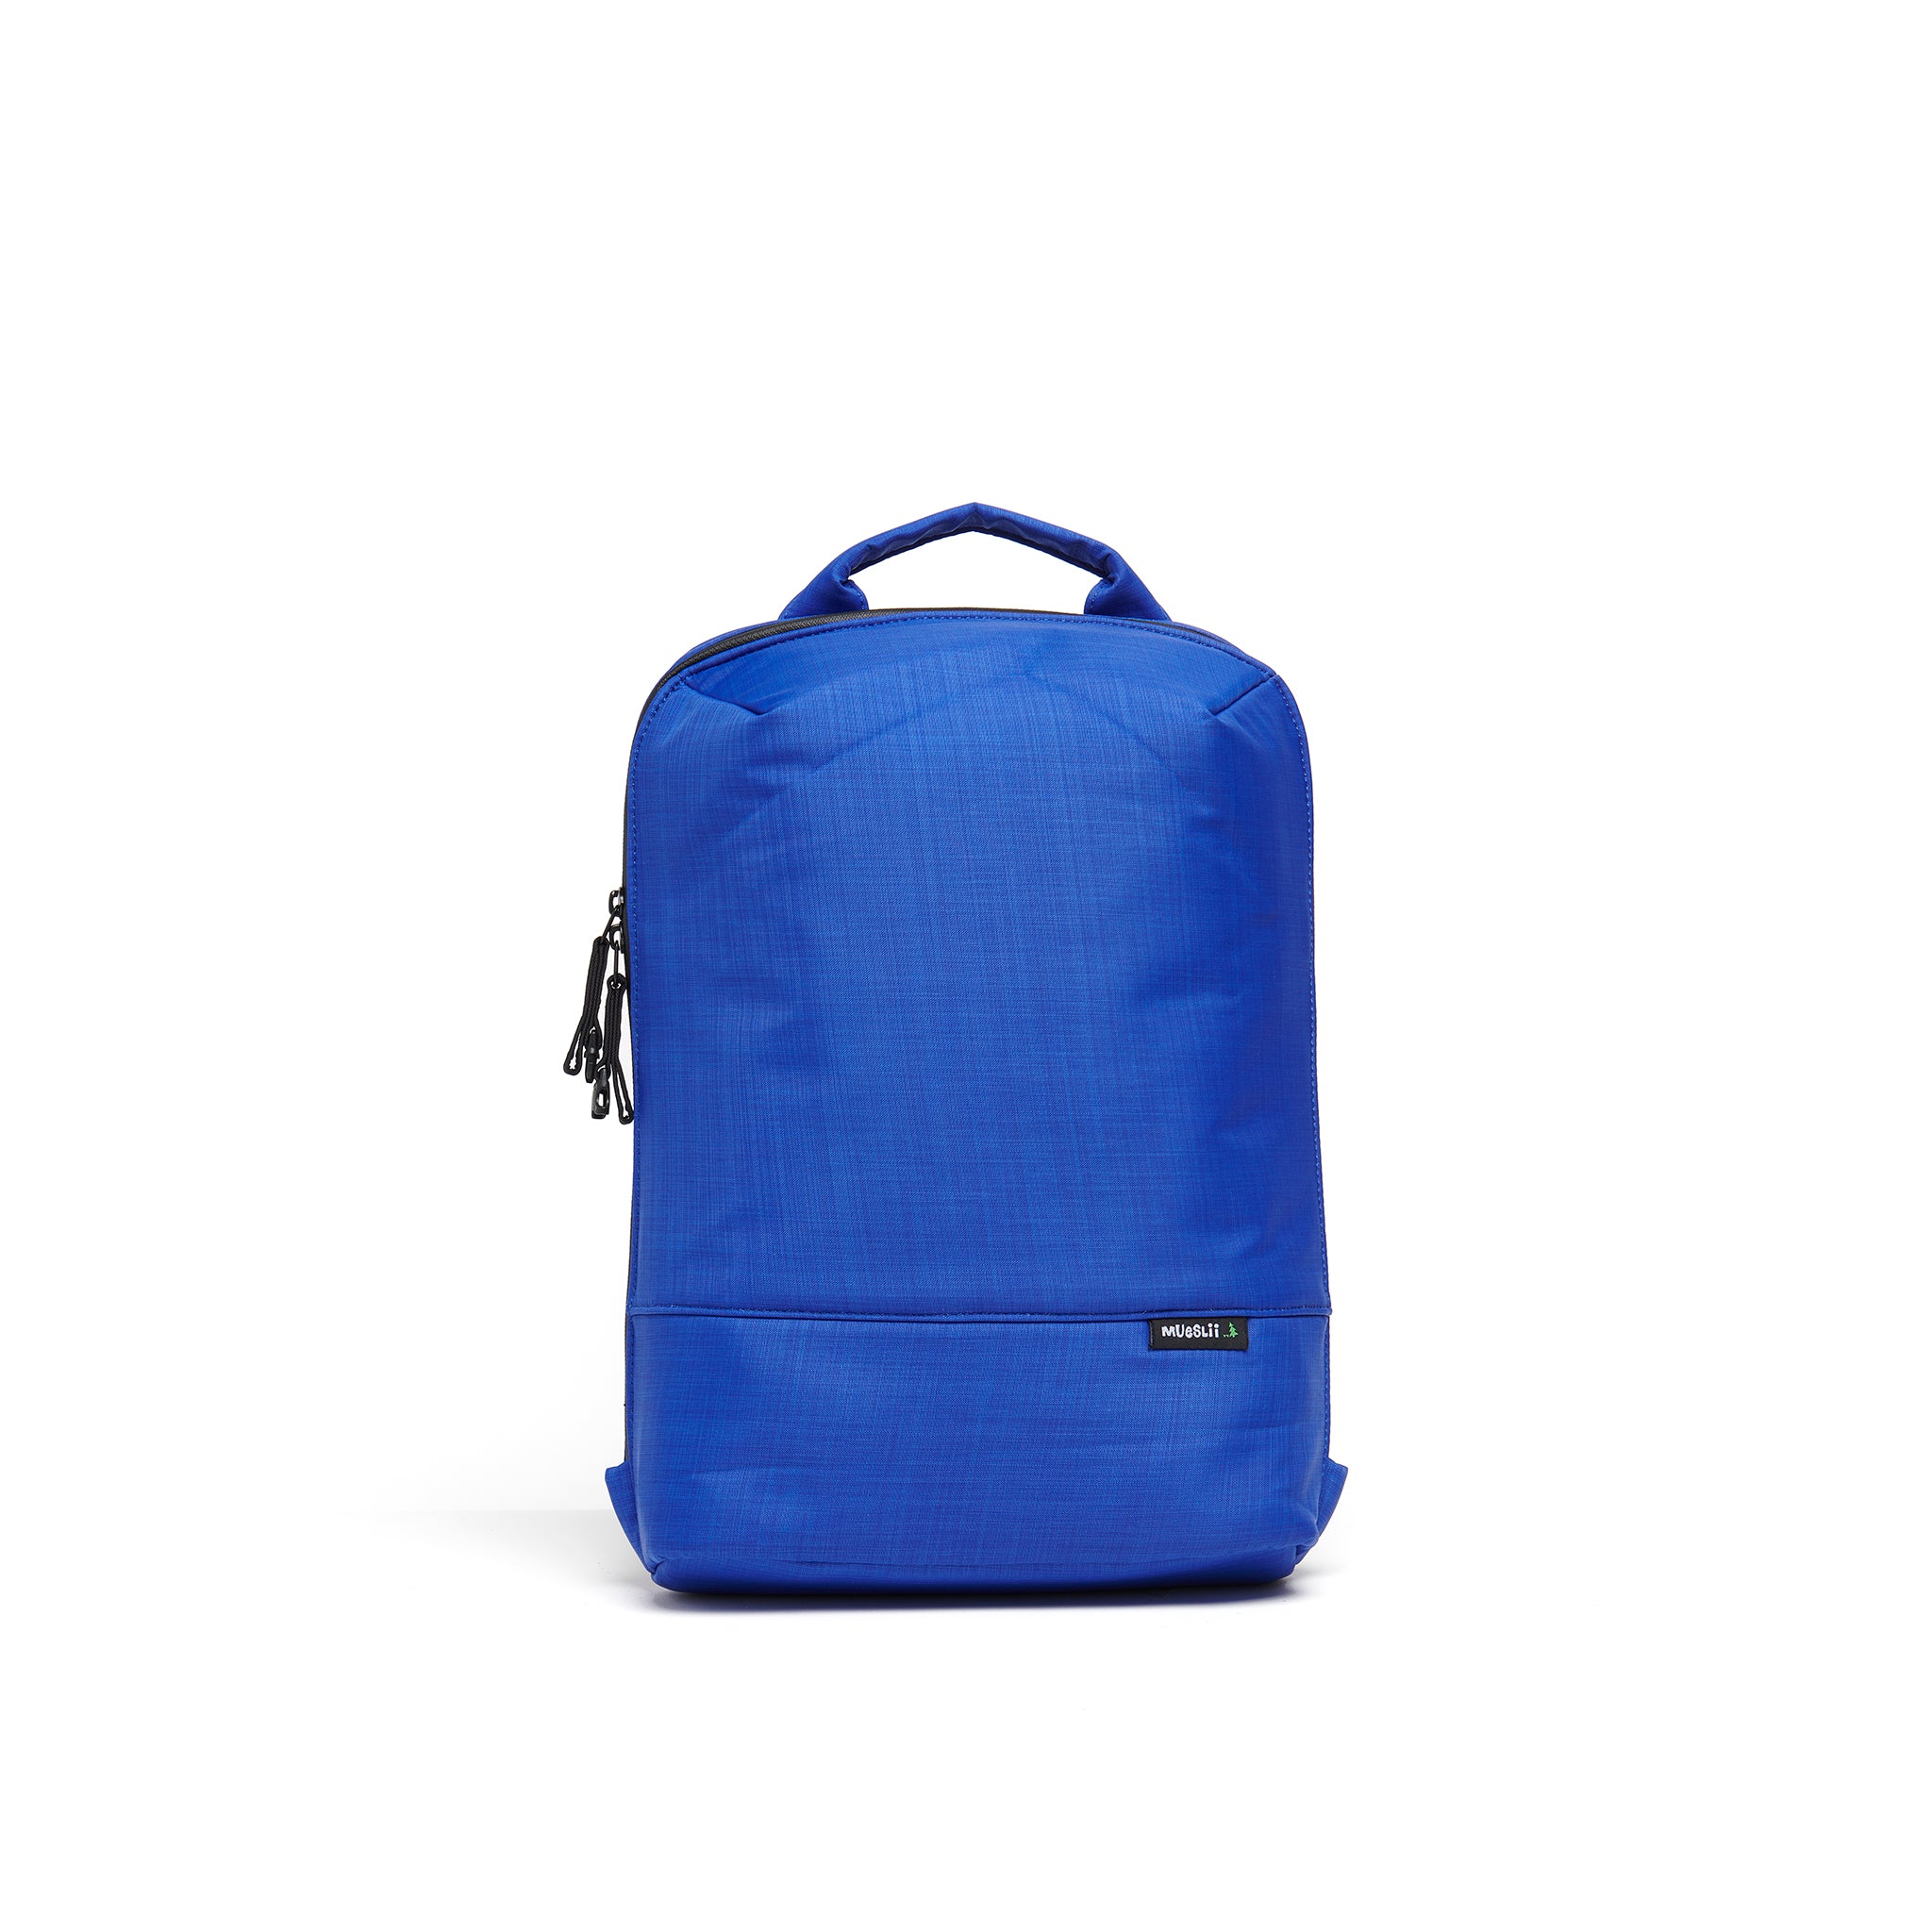 Mueslii small backpack,  made of  water resistant canvas nylon,  with a laptop compartment, color summer blue, front view.